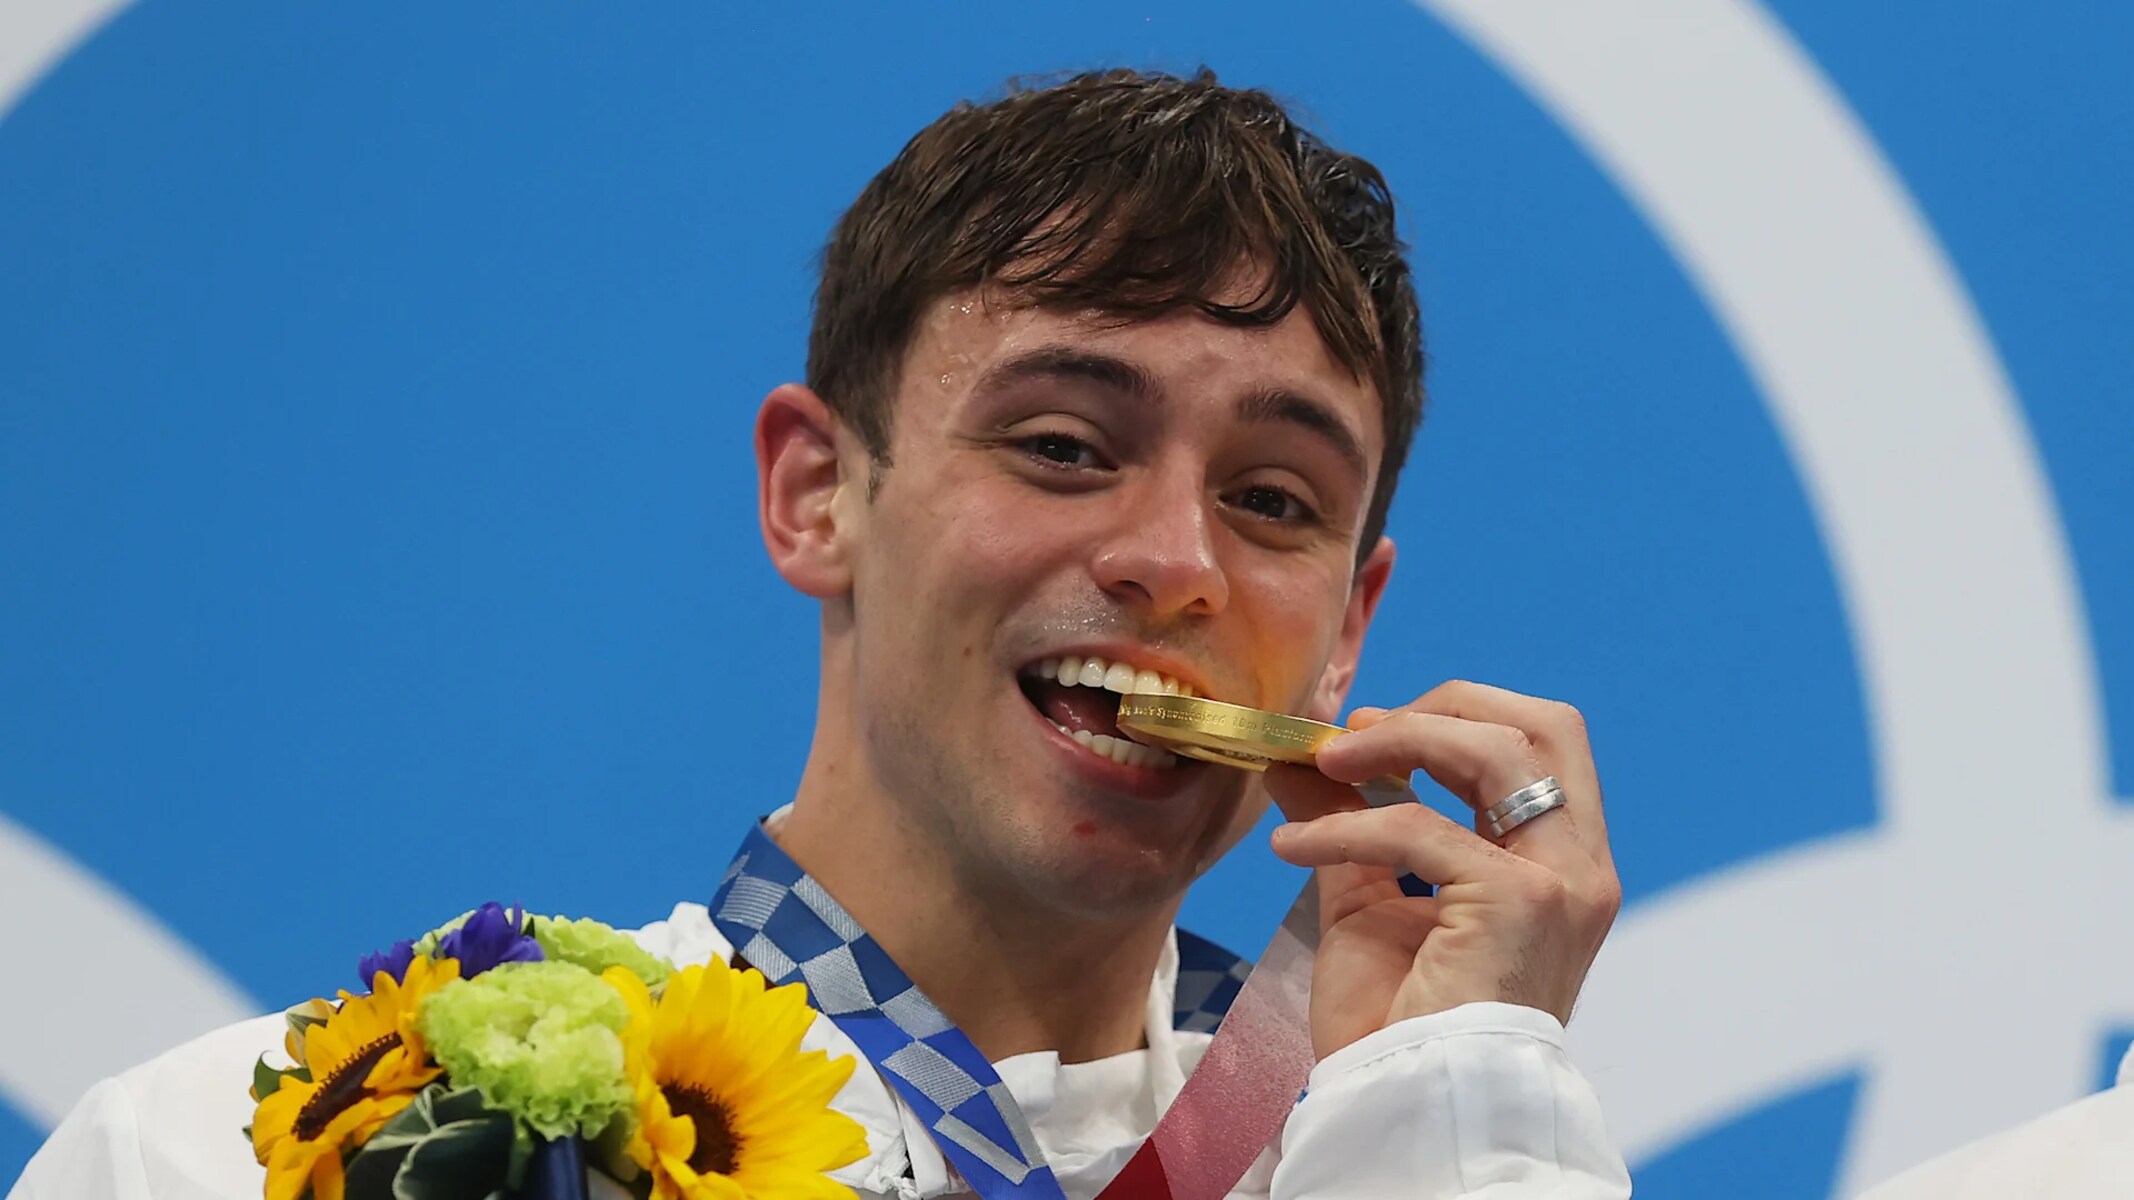 15 Unbelievable Facts About Tom Daley